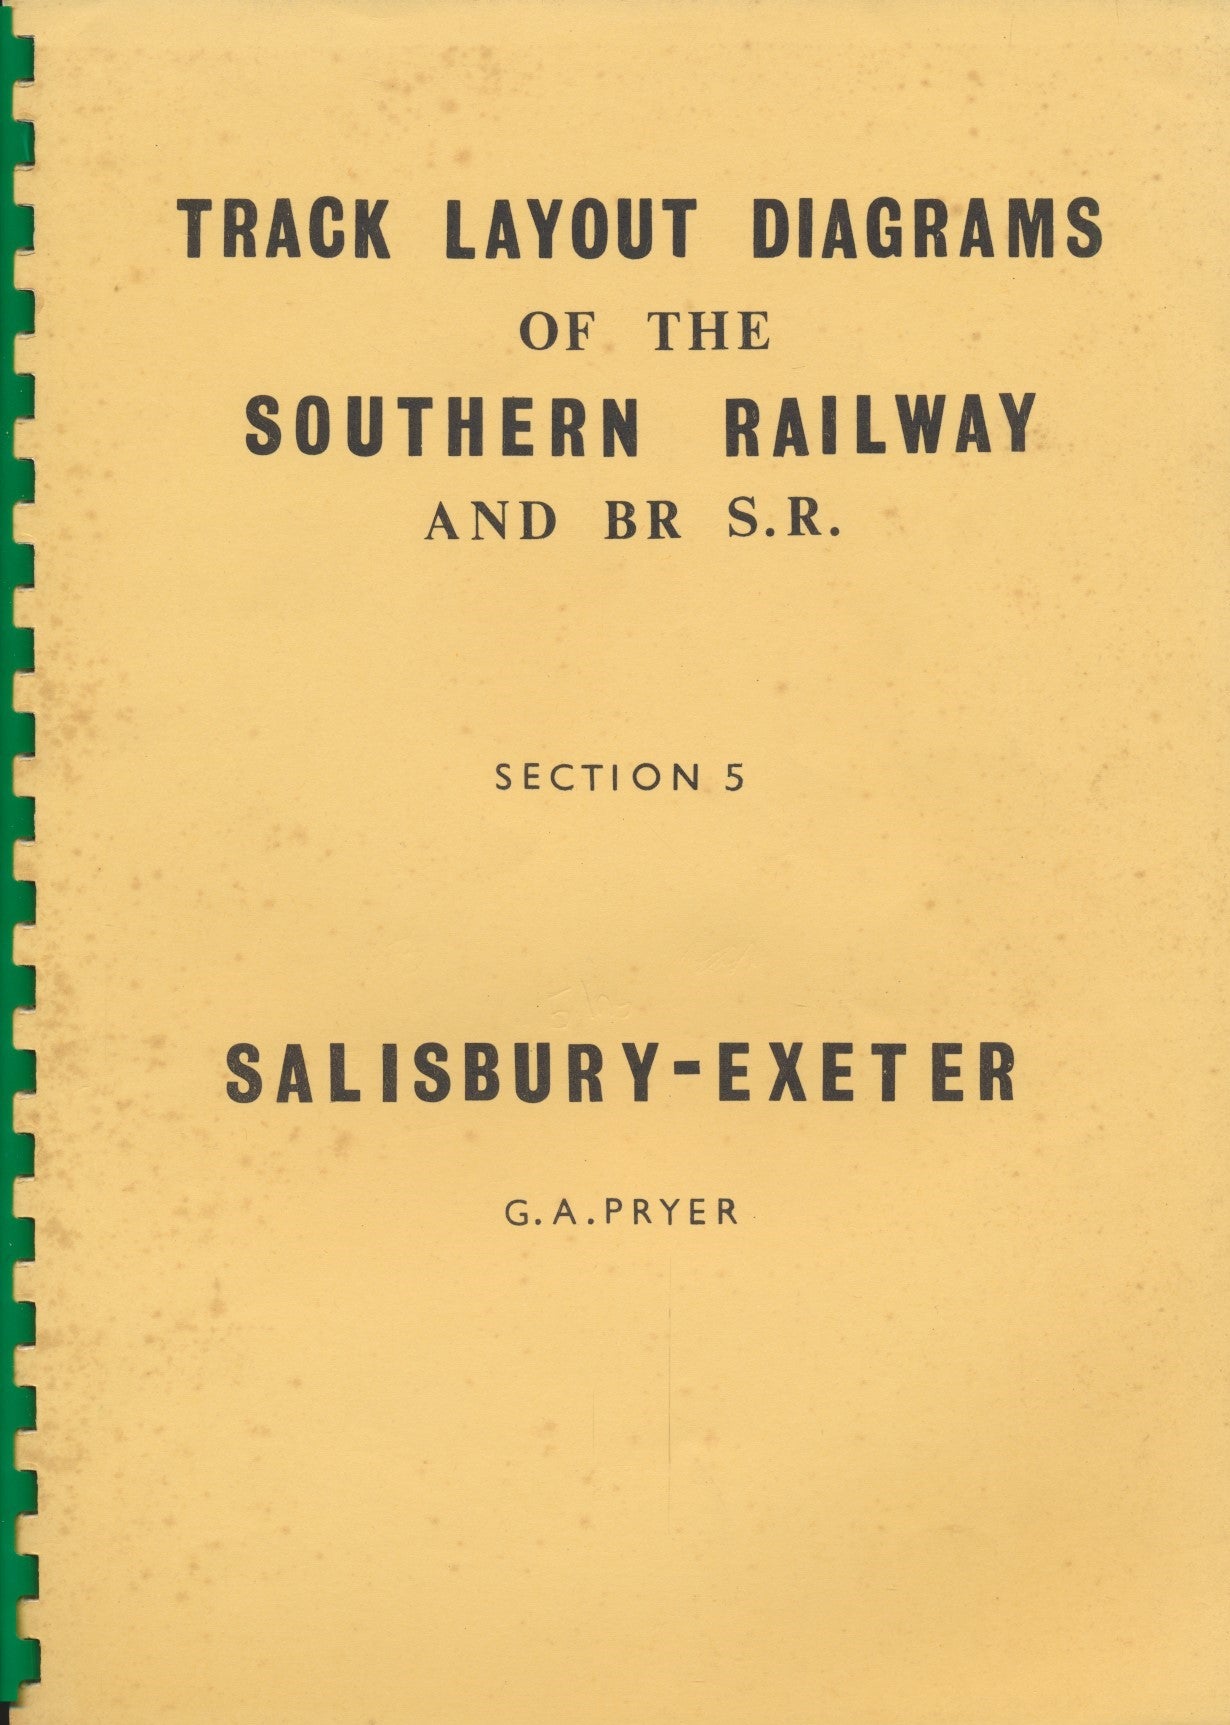 Track Layout Diagrams of the Southern Railway and BR (SR) - S 5 Salisbury to Exeter (and Branches)